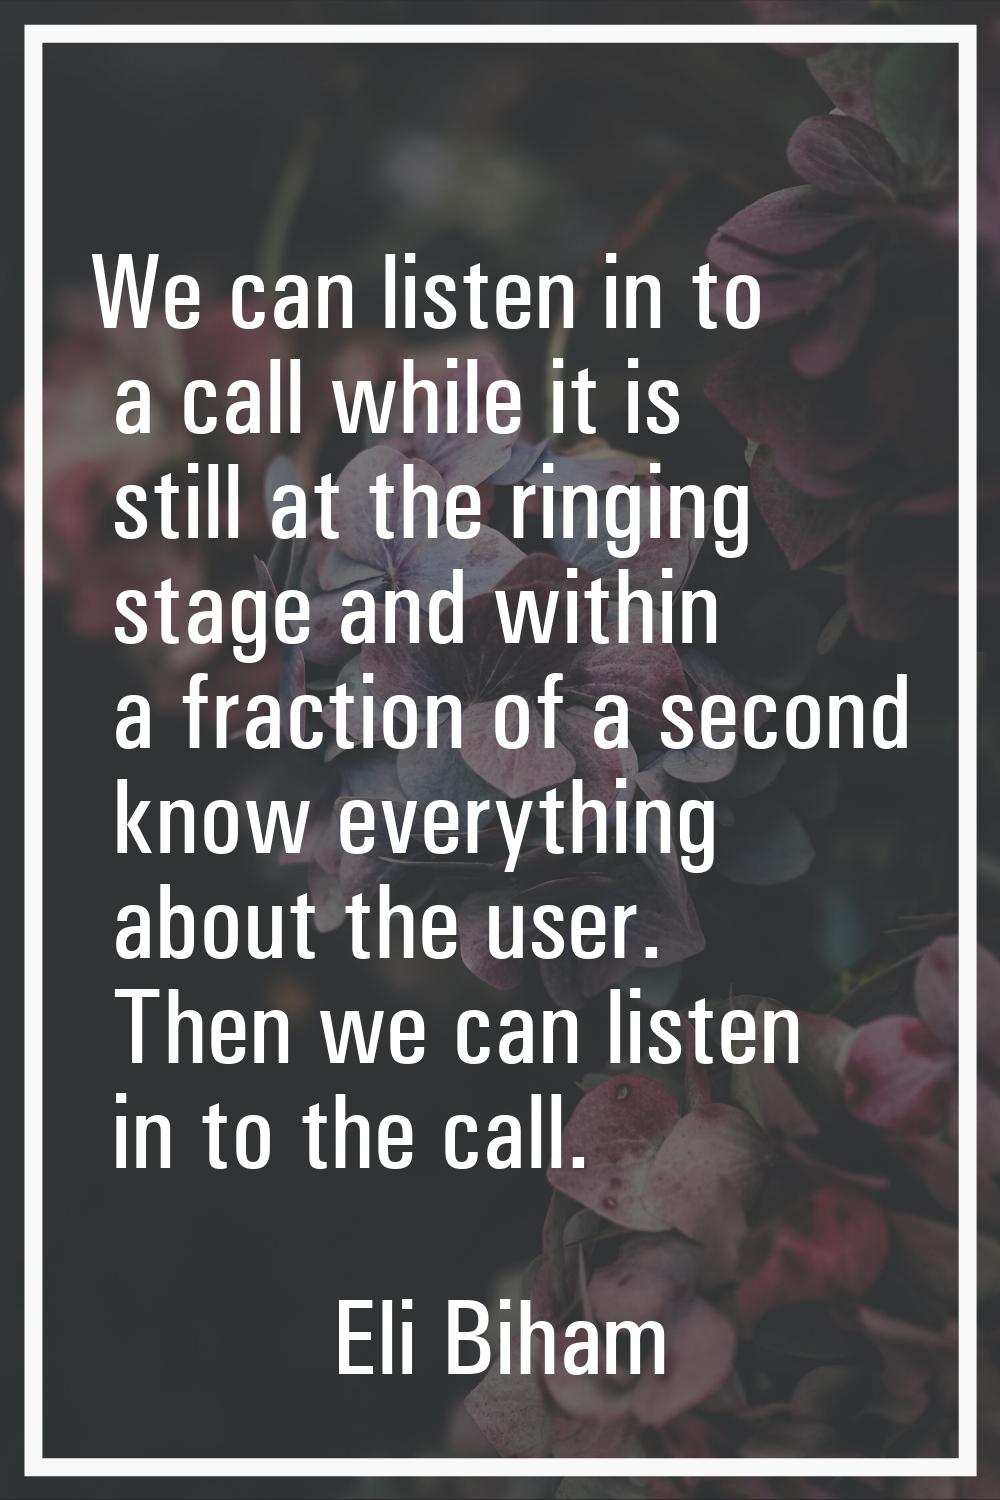 We can listen in to a call while it is still at the ringing stage and within a fraction of a second